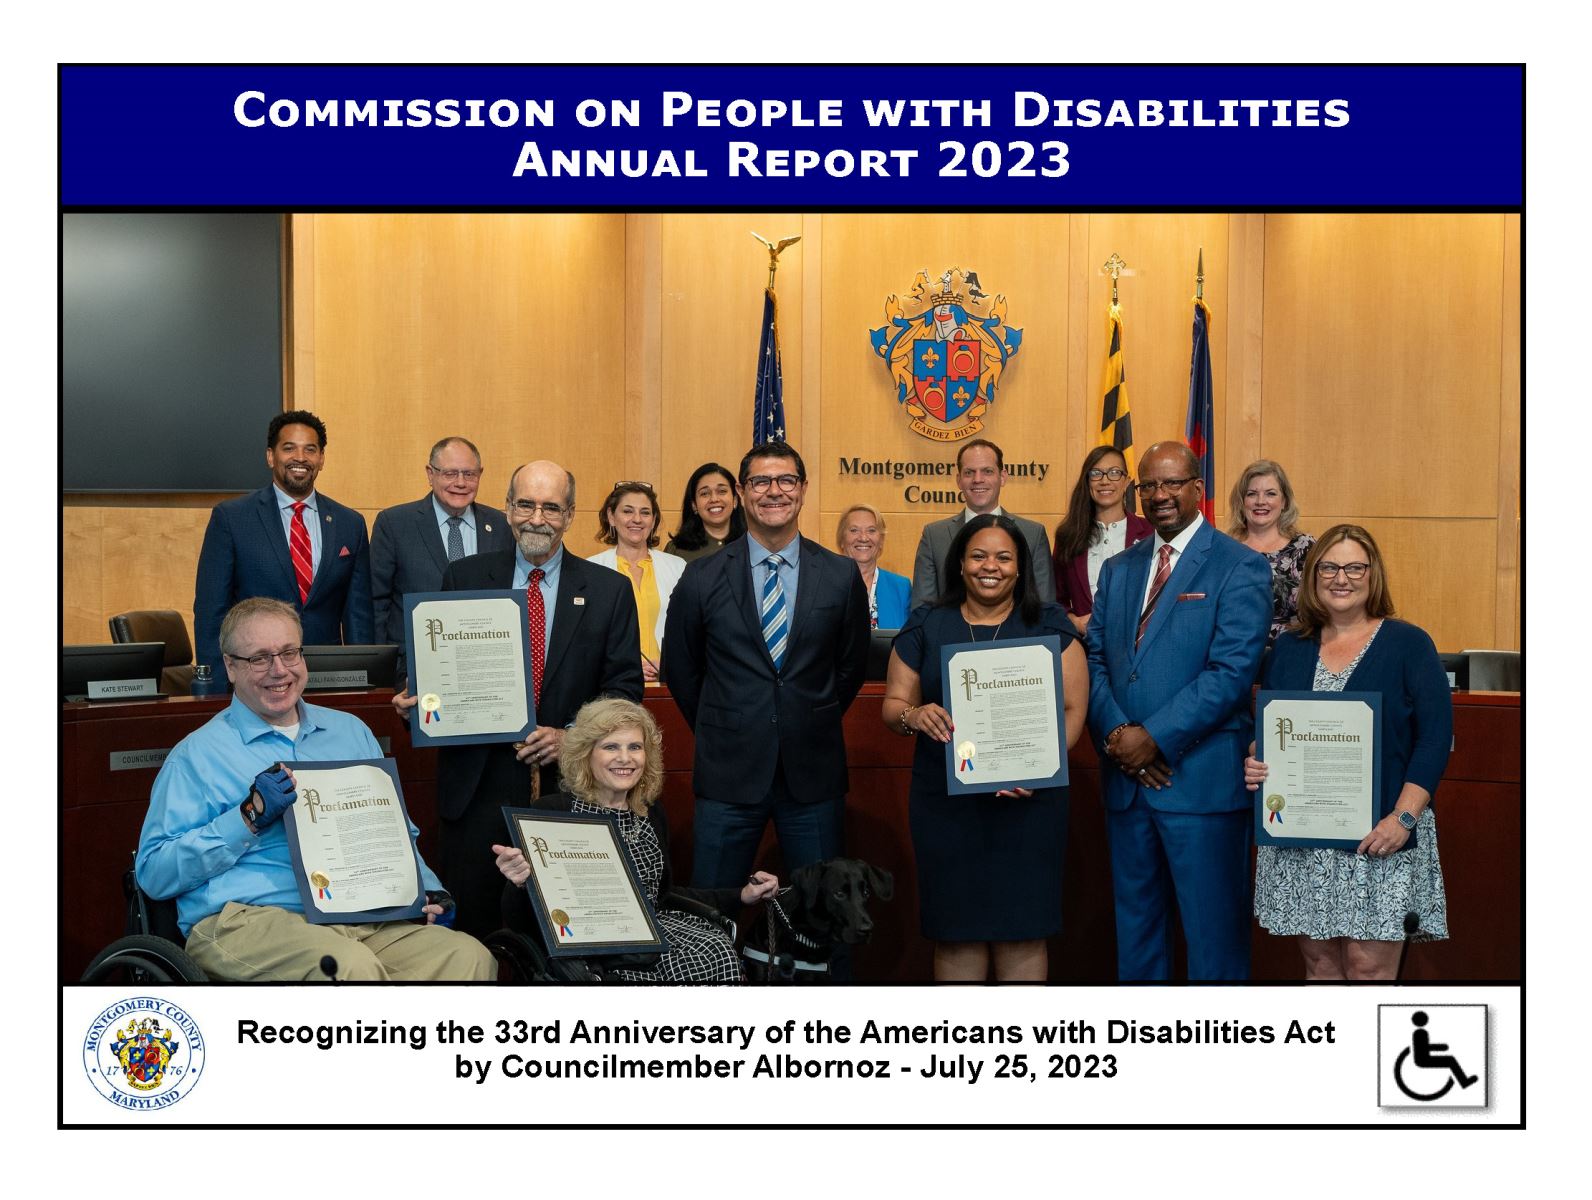 Commission on People with Disabilities Annual Report 2023